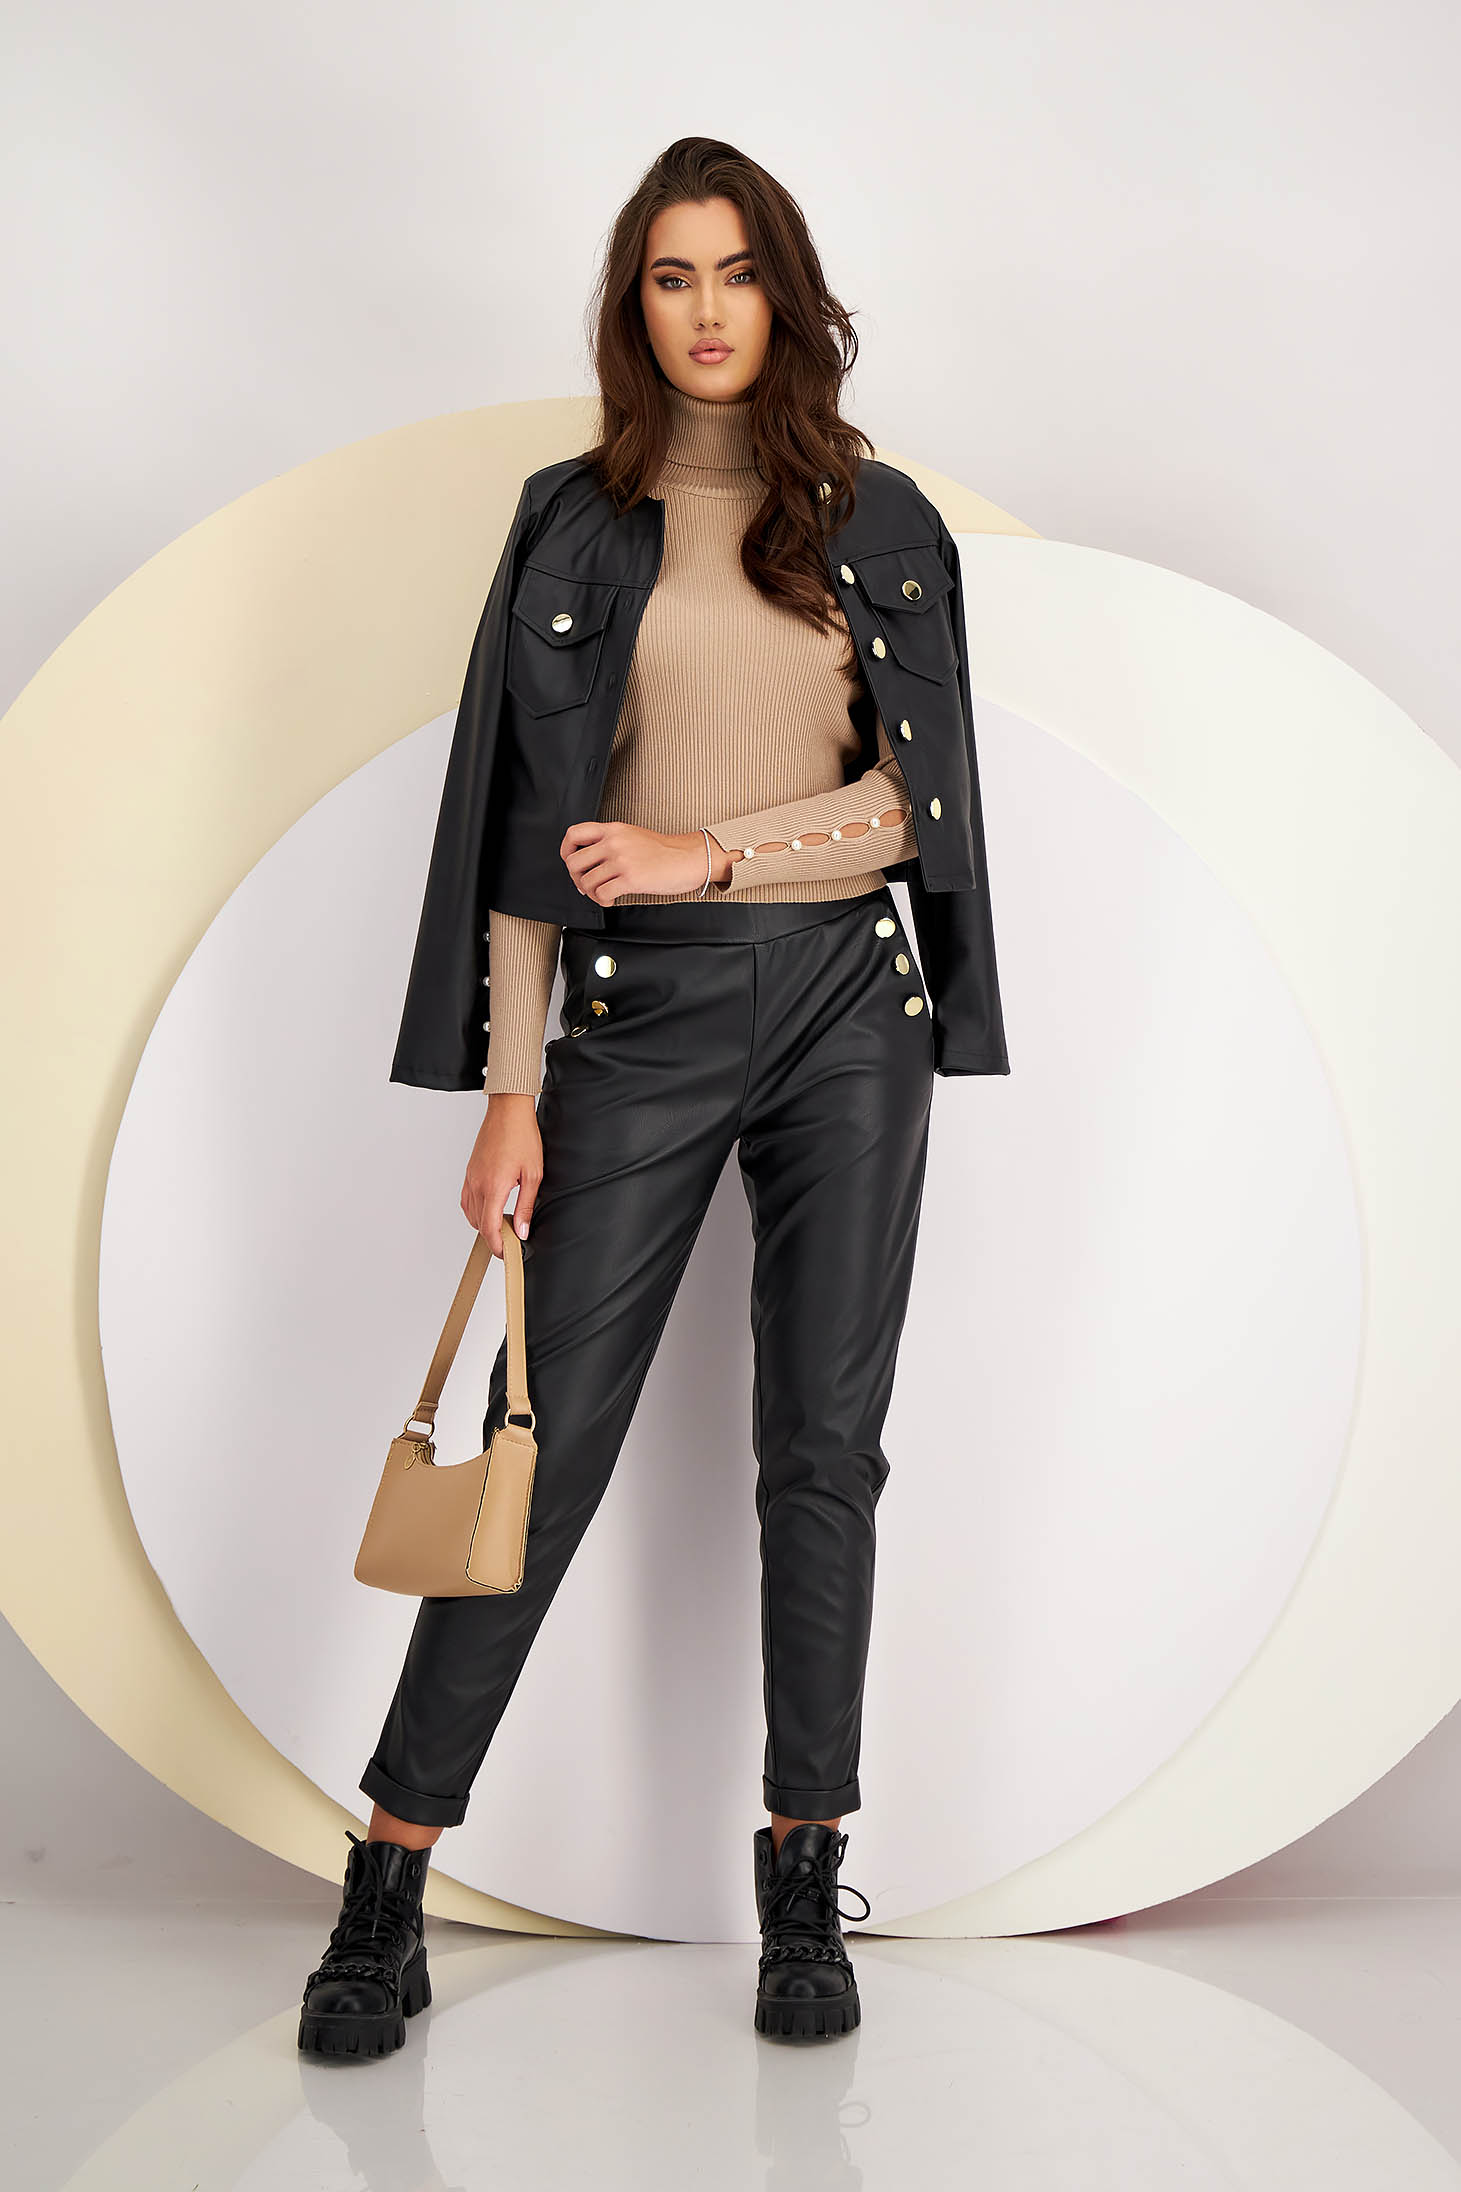 Black trousers from ecological leather medium waist with button accessories conical